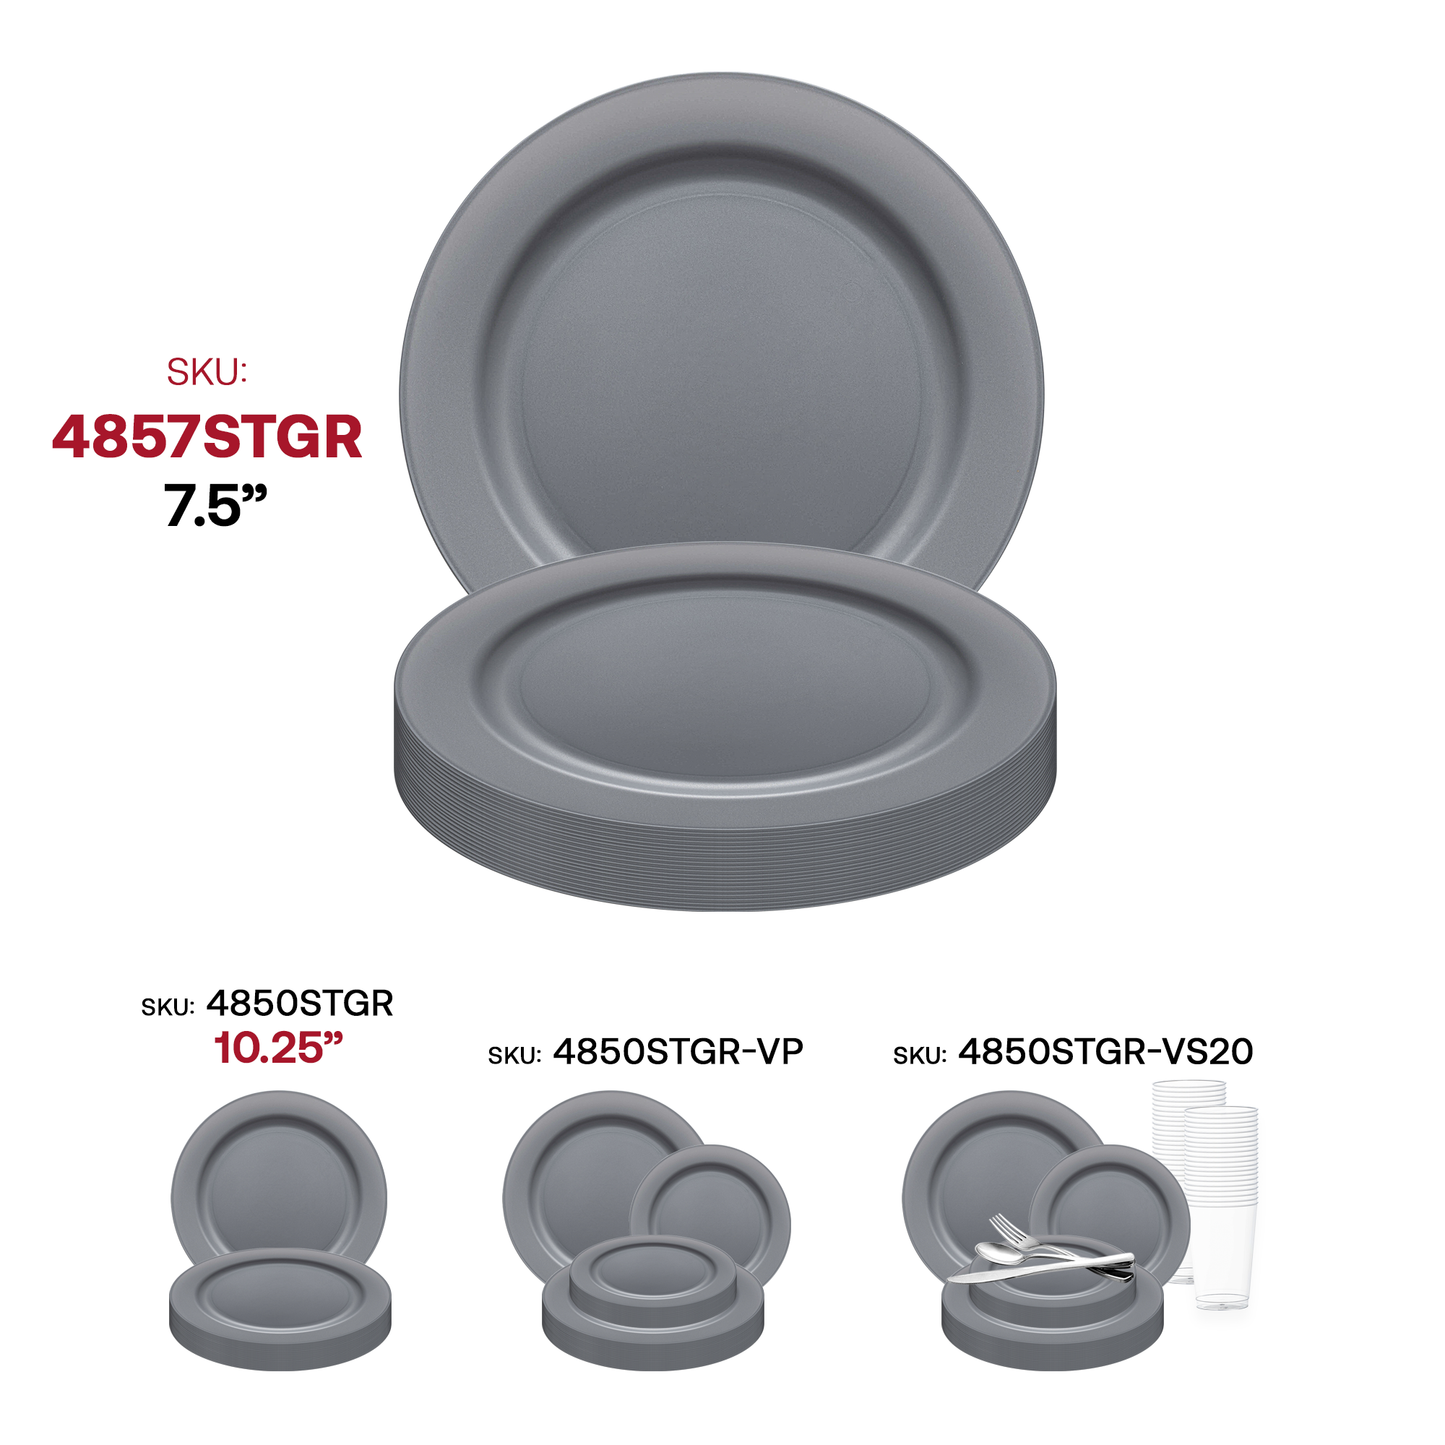 Matte Steel Gray Round Disposable Plastic Appetizer/Salad Plates (7.5") SKU | The Kaya Collection